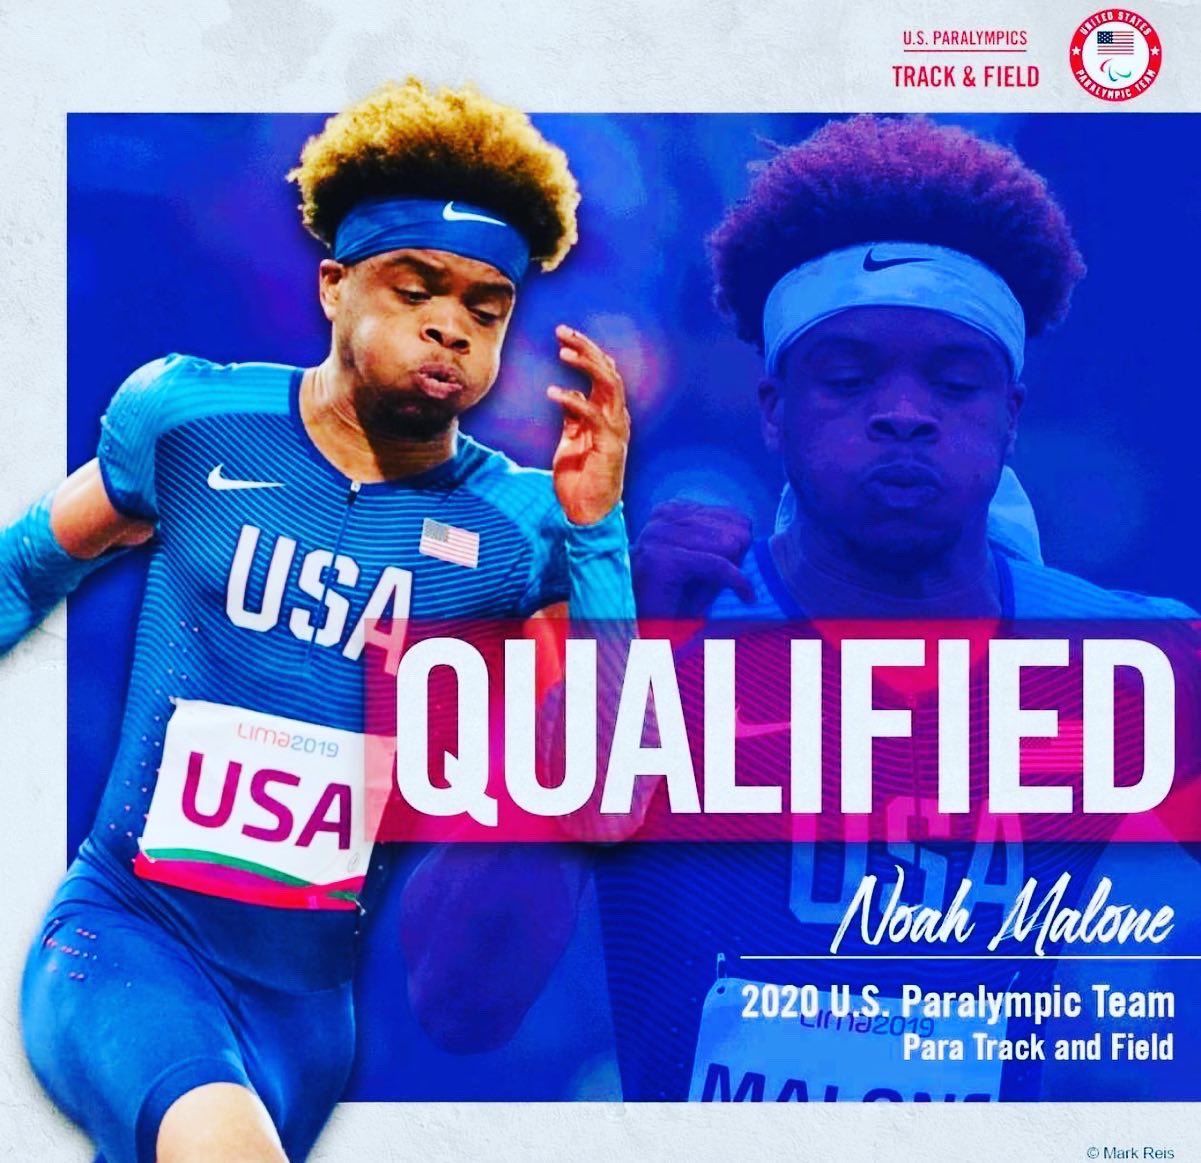 a track and field runner in front of a graphic that says, "qualified noah malone 2020 u.s. paralympic team para track and field"